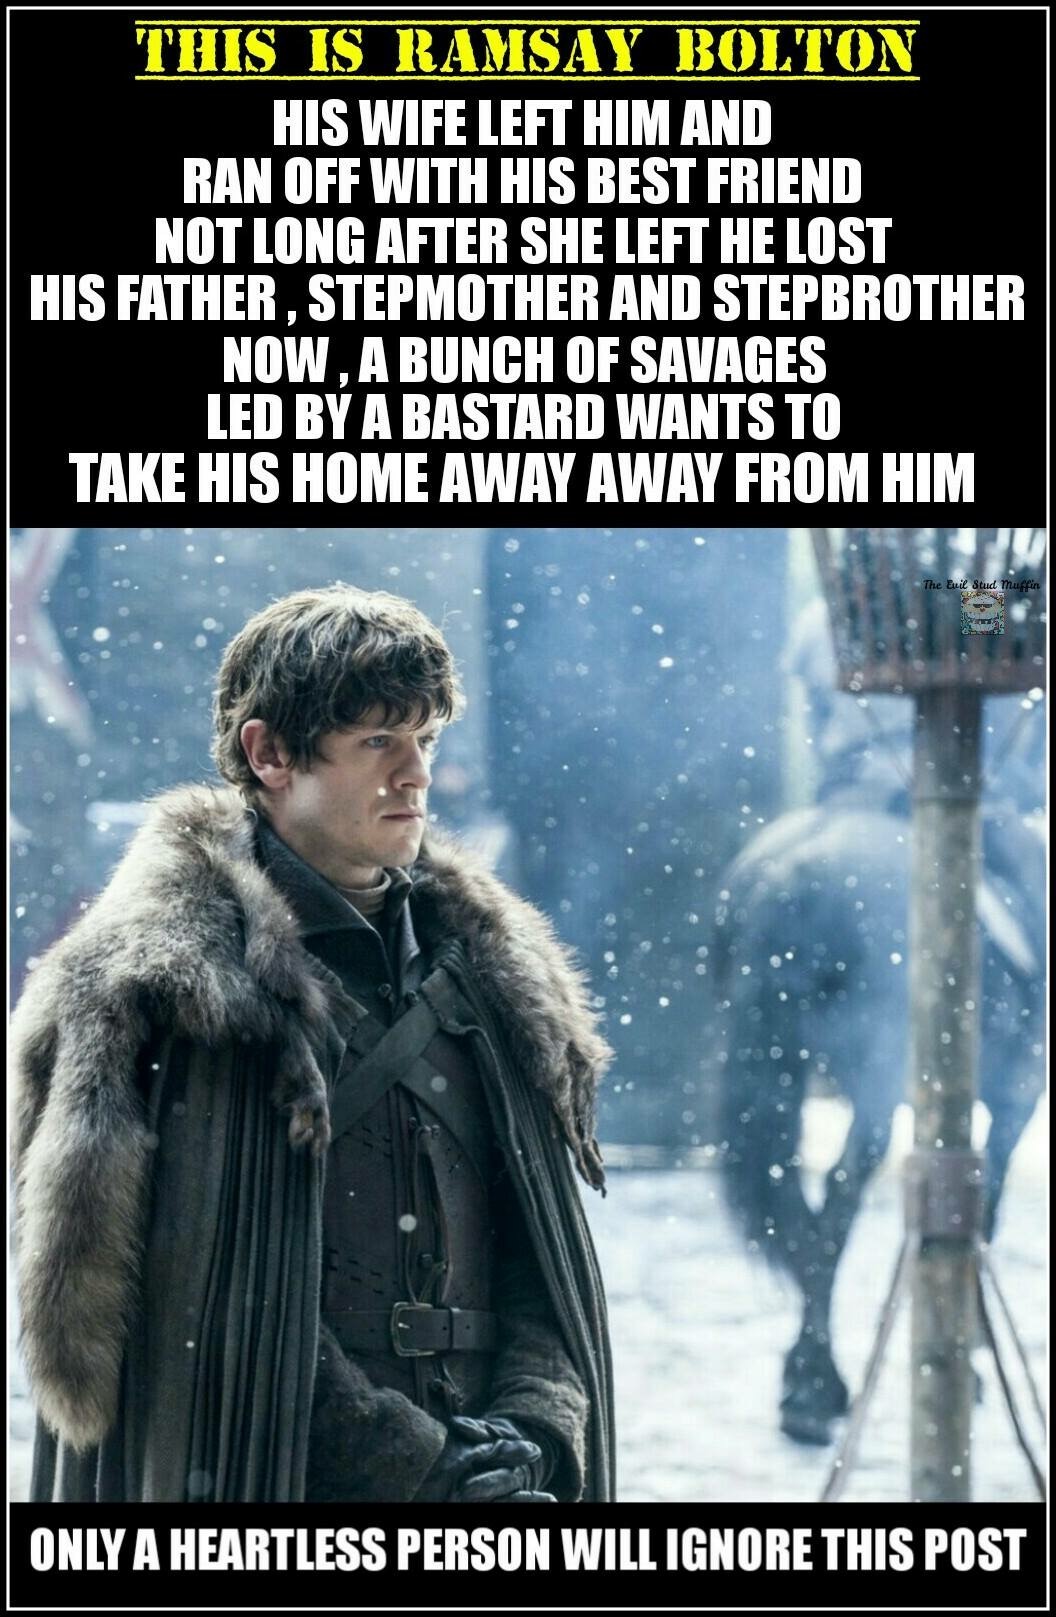 game of thrones metal meme - This Is Ramsay Bolton His Wife Left Him And Ran Off With His Best Friend Not Long After She Left He Lost His Father , Stepmother And Stepbrother Now, A Bunch Of Savages Led By A Bastard Wants To Take His Home Away Away From Hi